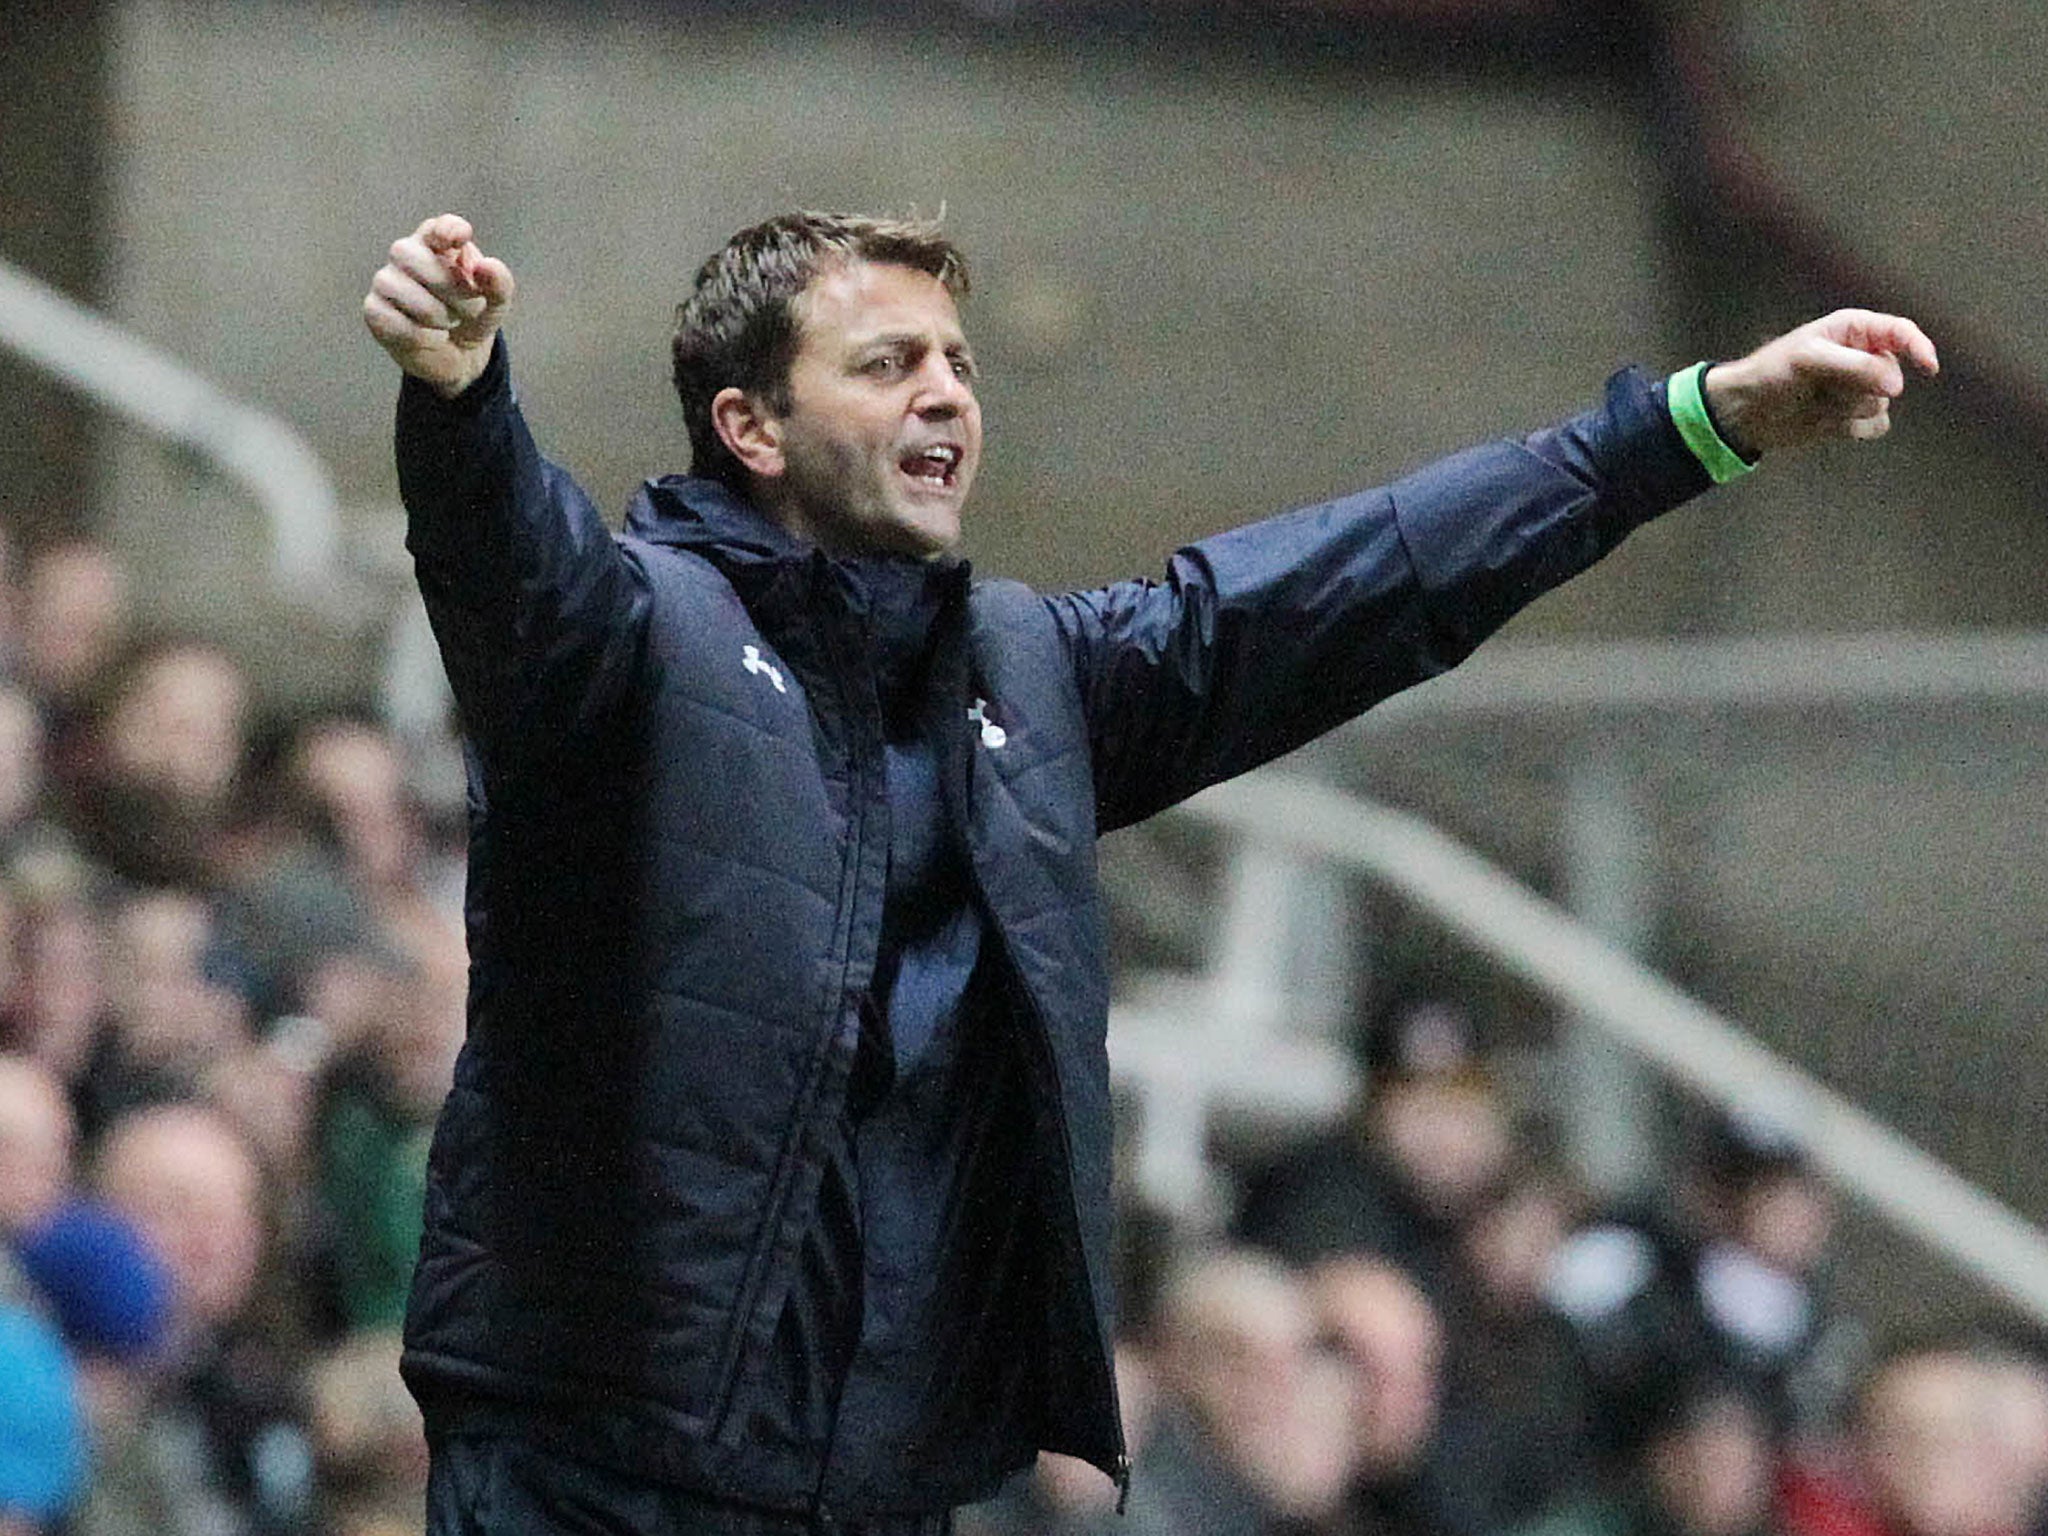 Tottenham manager Tim Sherwood remonstrates from the touchline